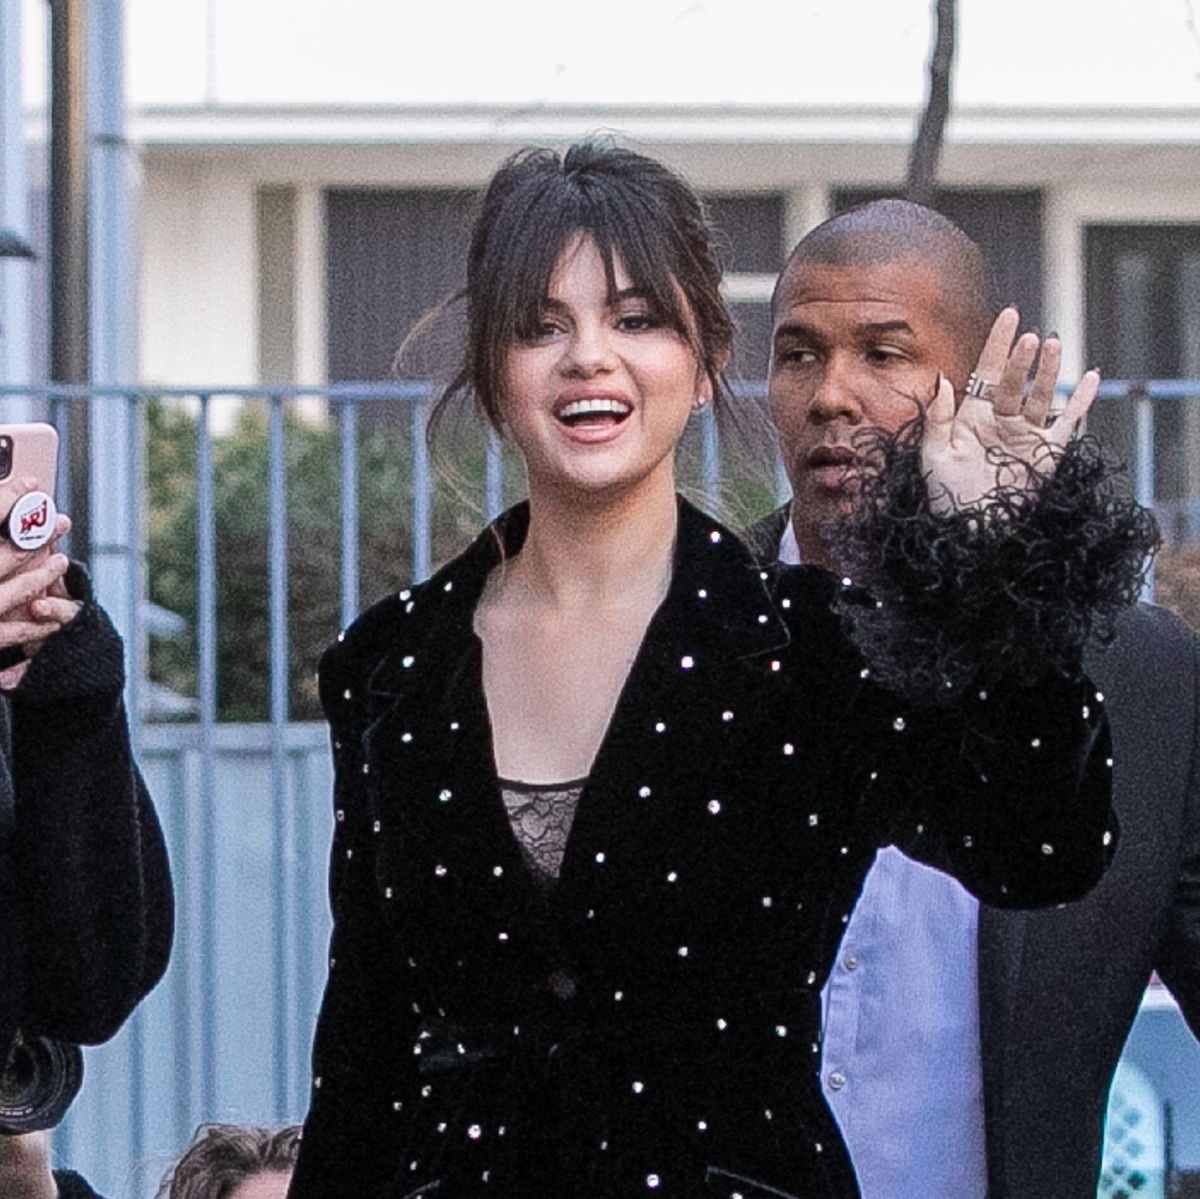 Selena Gomez Just Wore a Lace Slip as a Dress in Paris